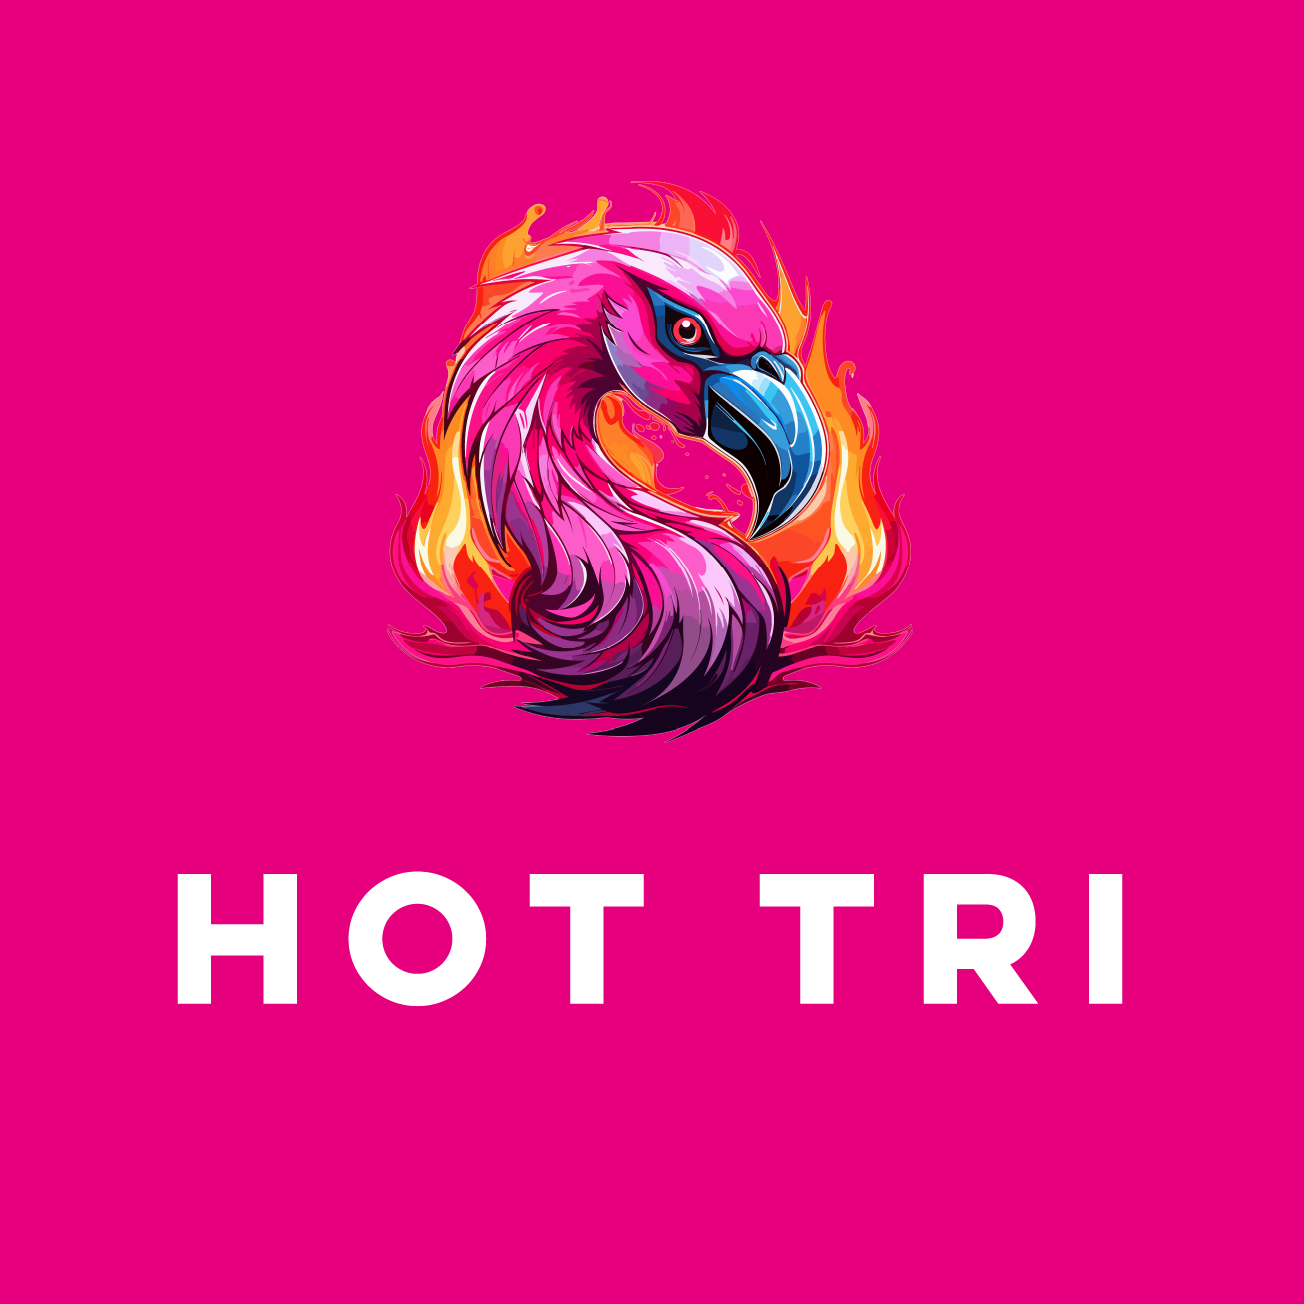 Club Image for HOT TRI